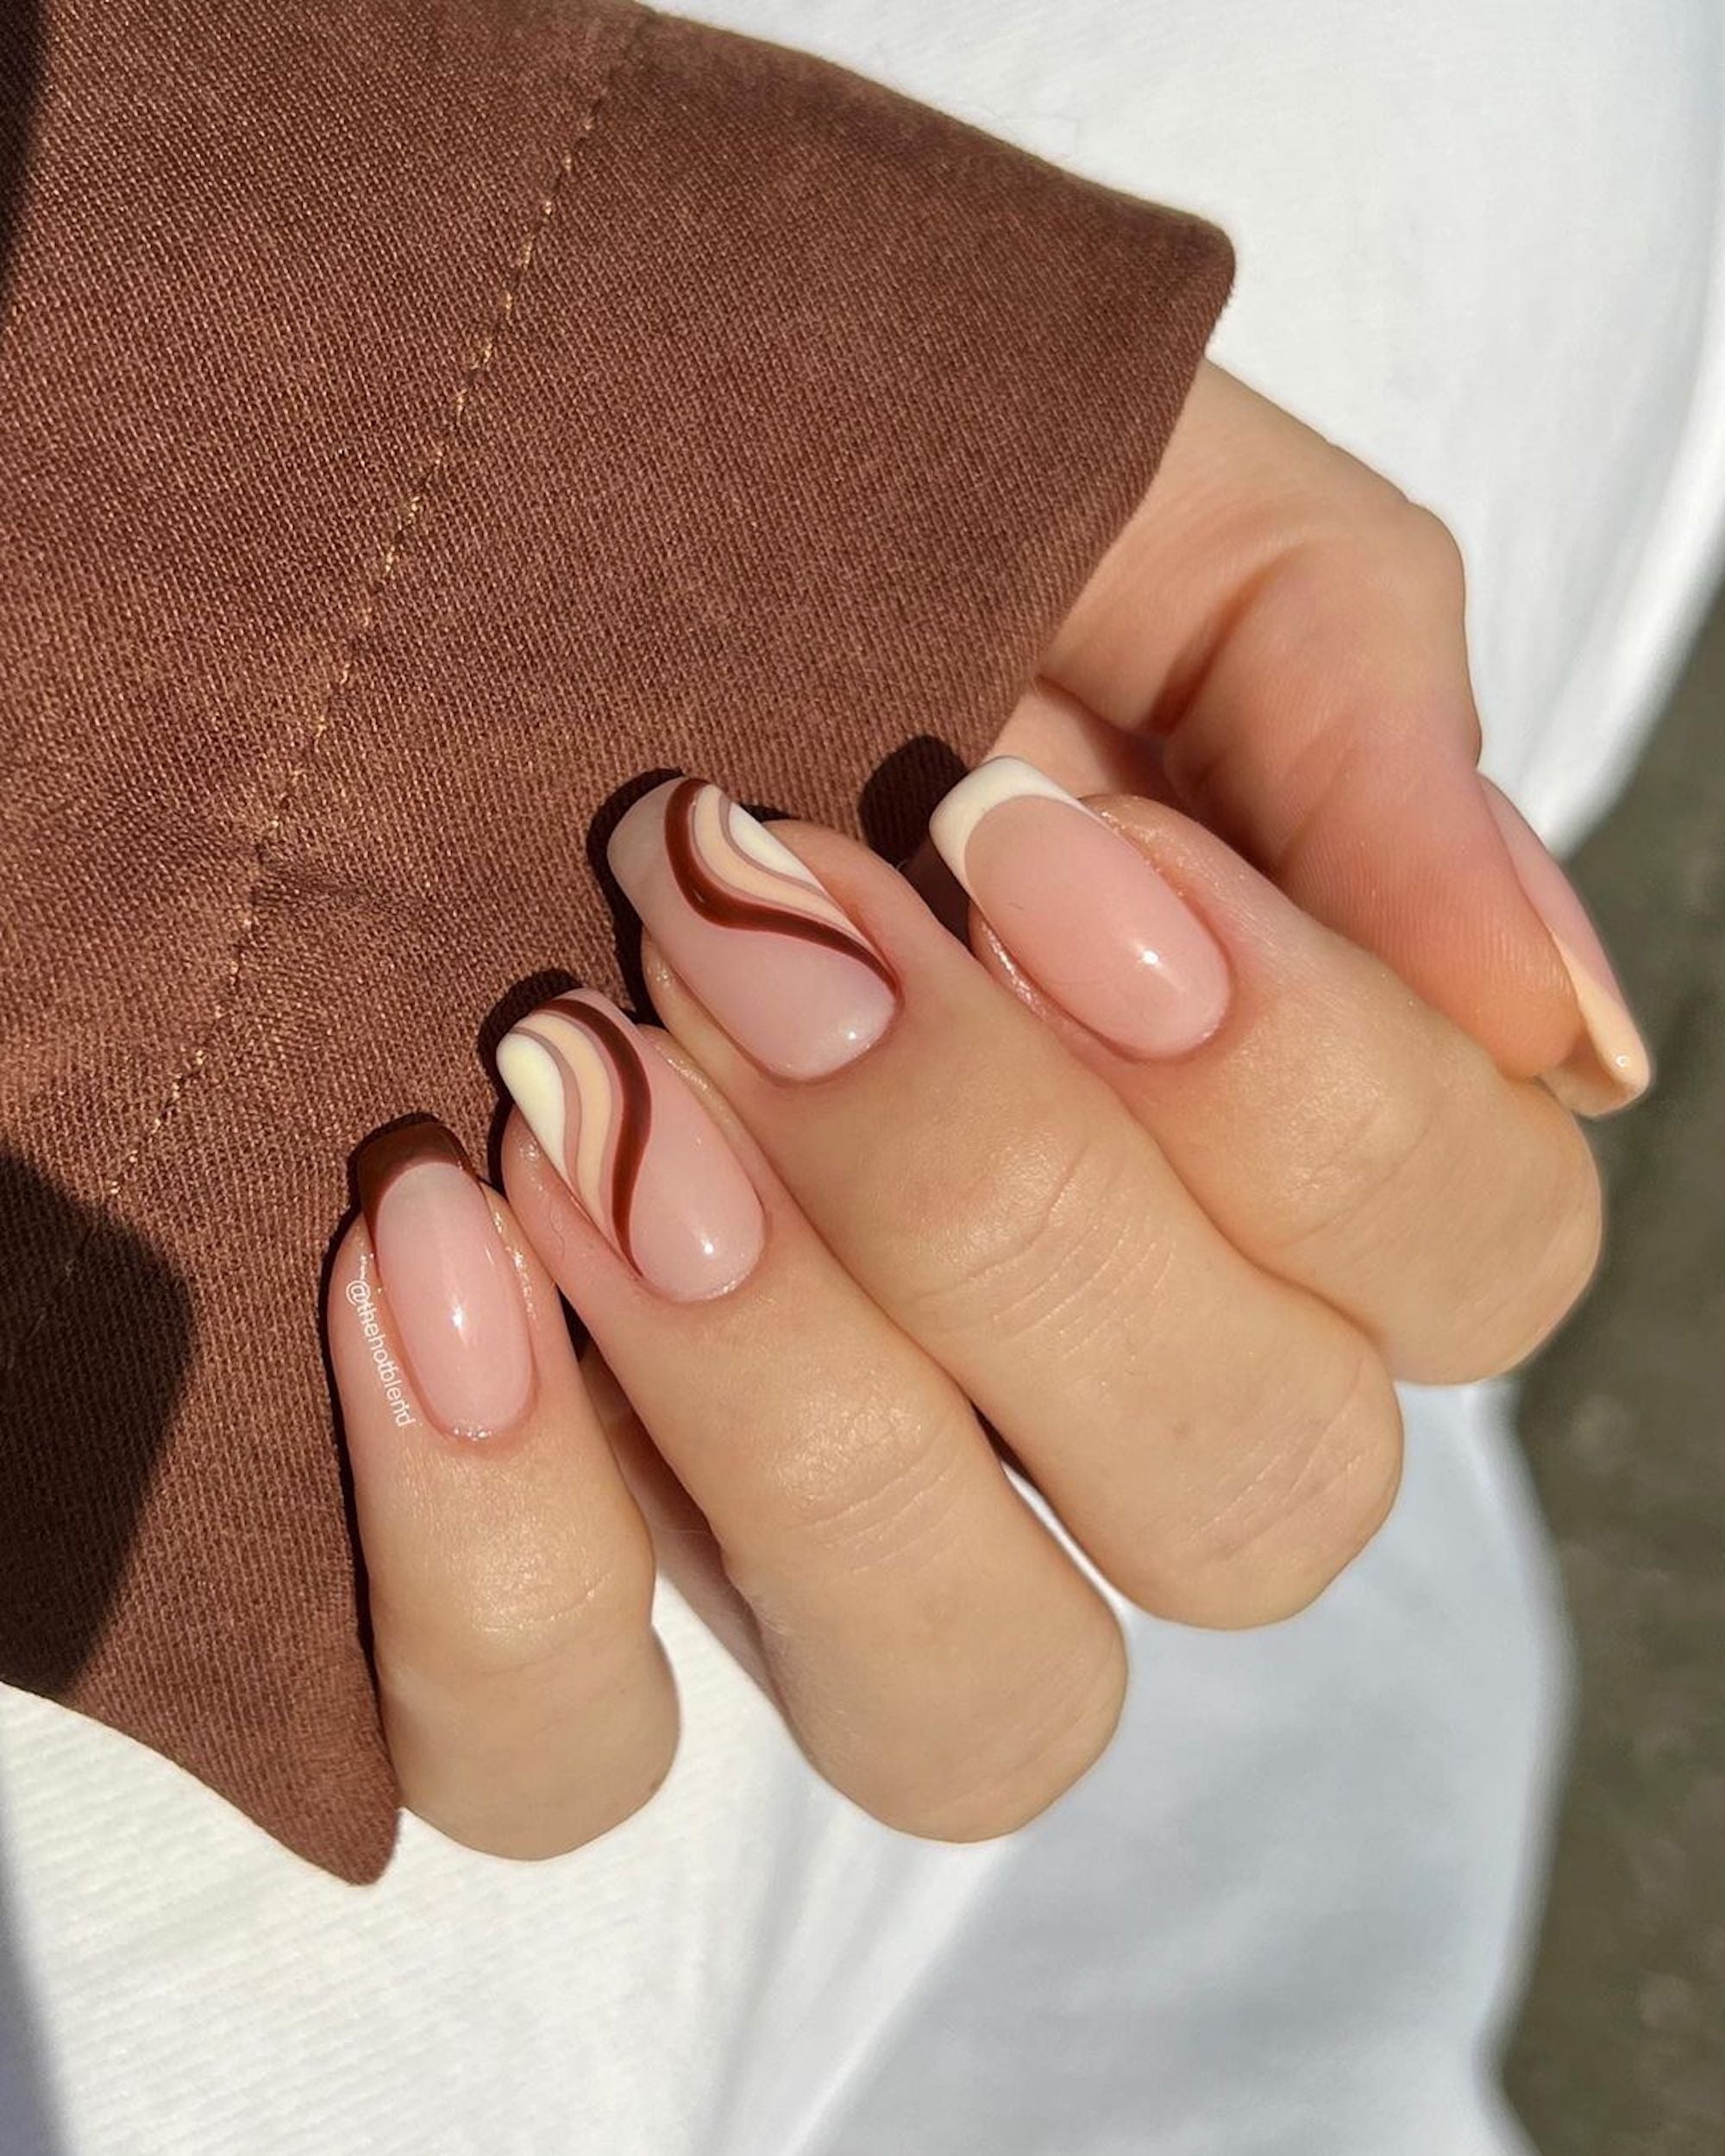 Wearable Autumn Nail Trends Taking Over London Salons